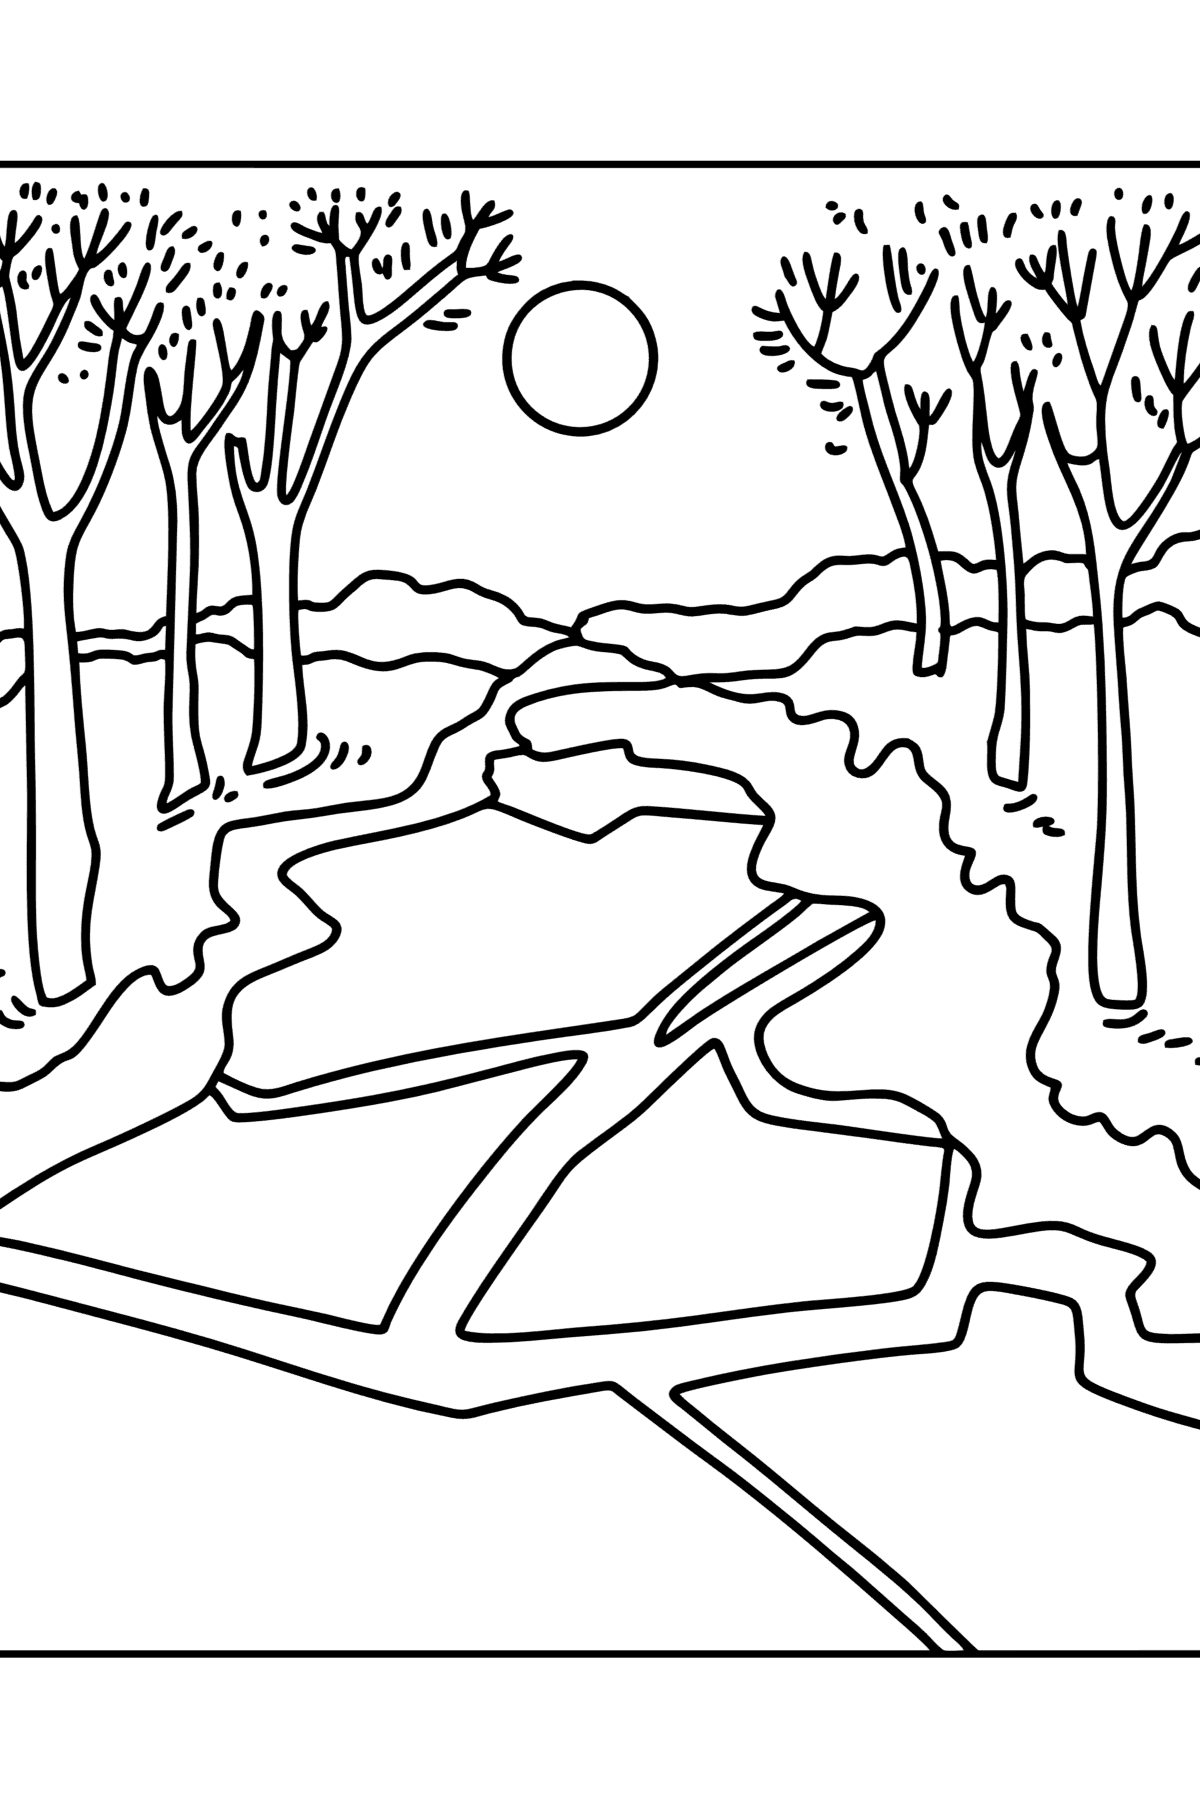 Spring River coloring page - Coloring Pages for Kids